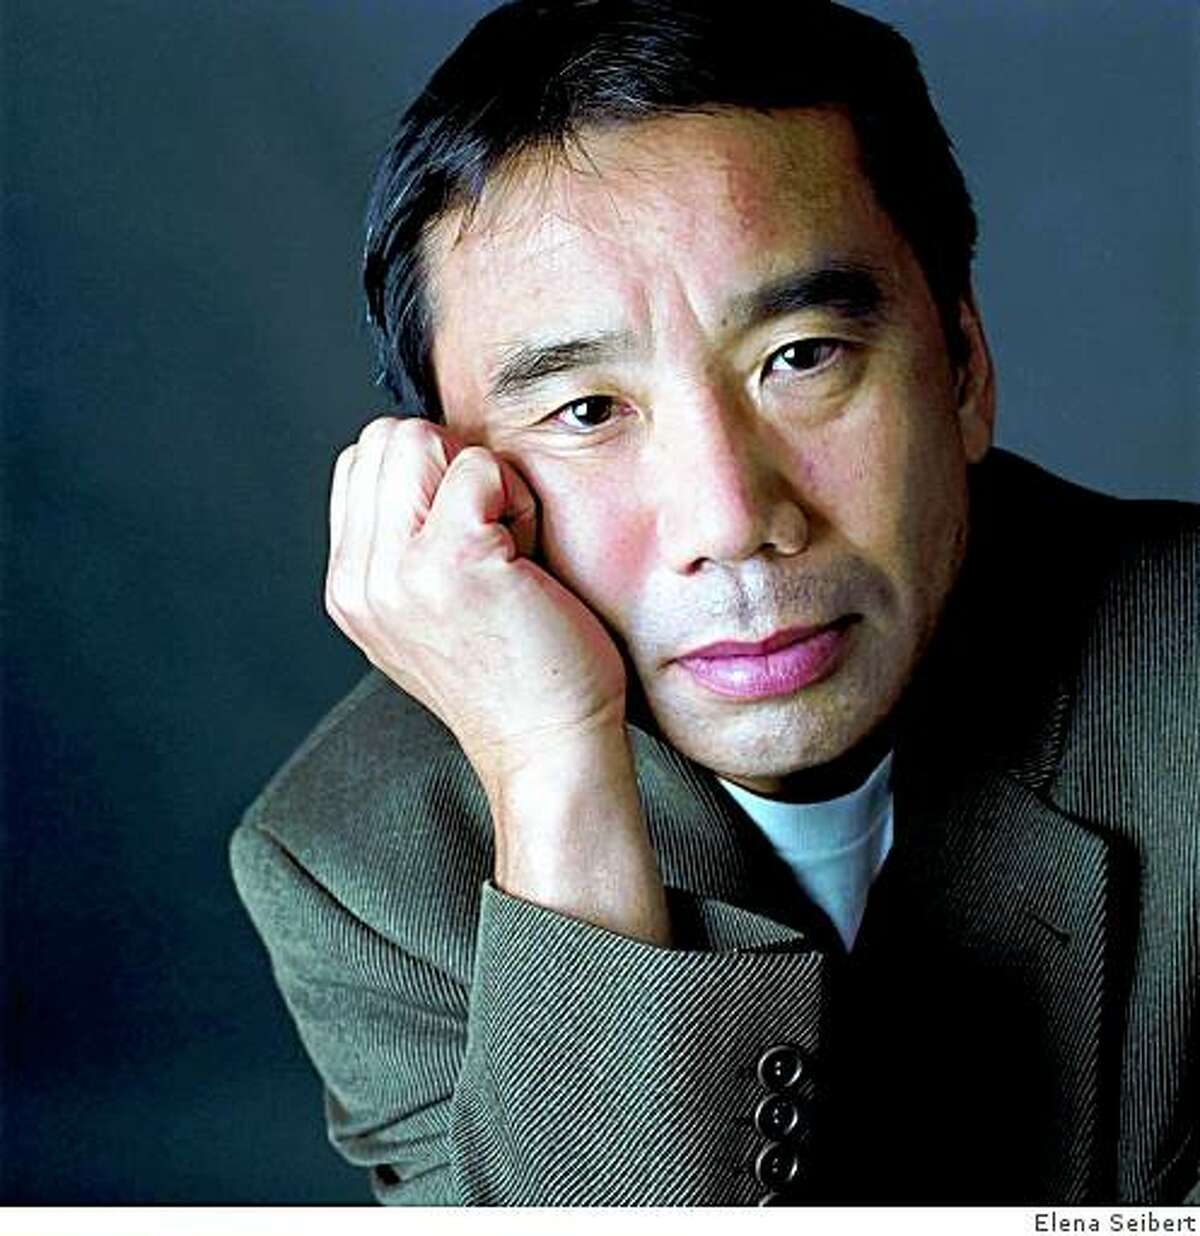 Haruki Murakami, author of "What I Talk About When I Talk About Running" / Credit: Elena Seibert / FOR USE WITH BOOK REVIEW ONLY